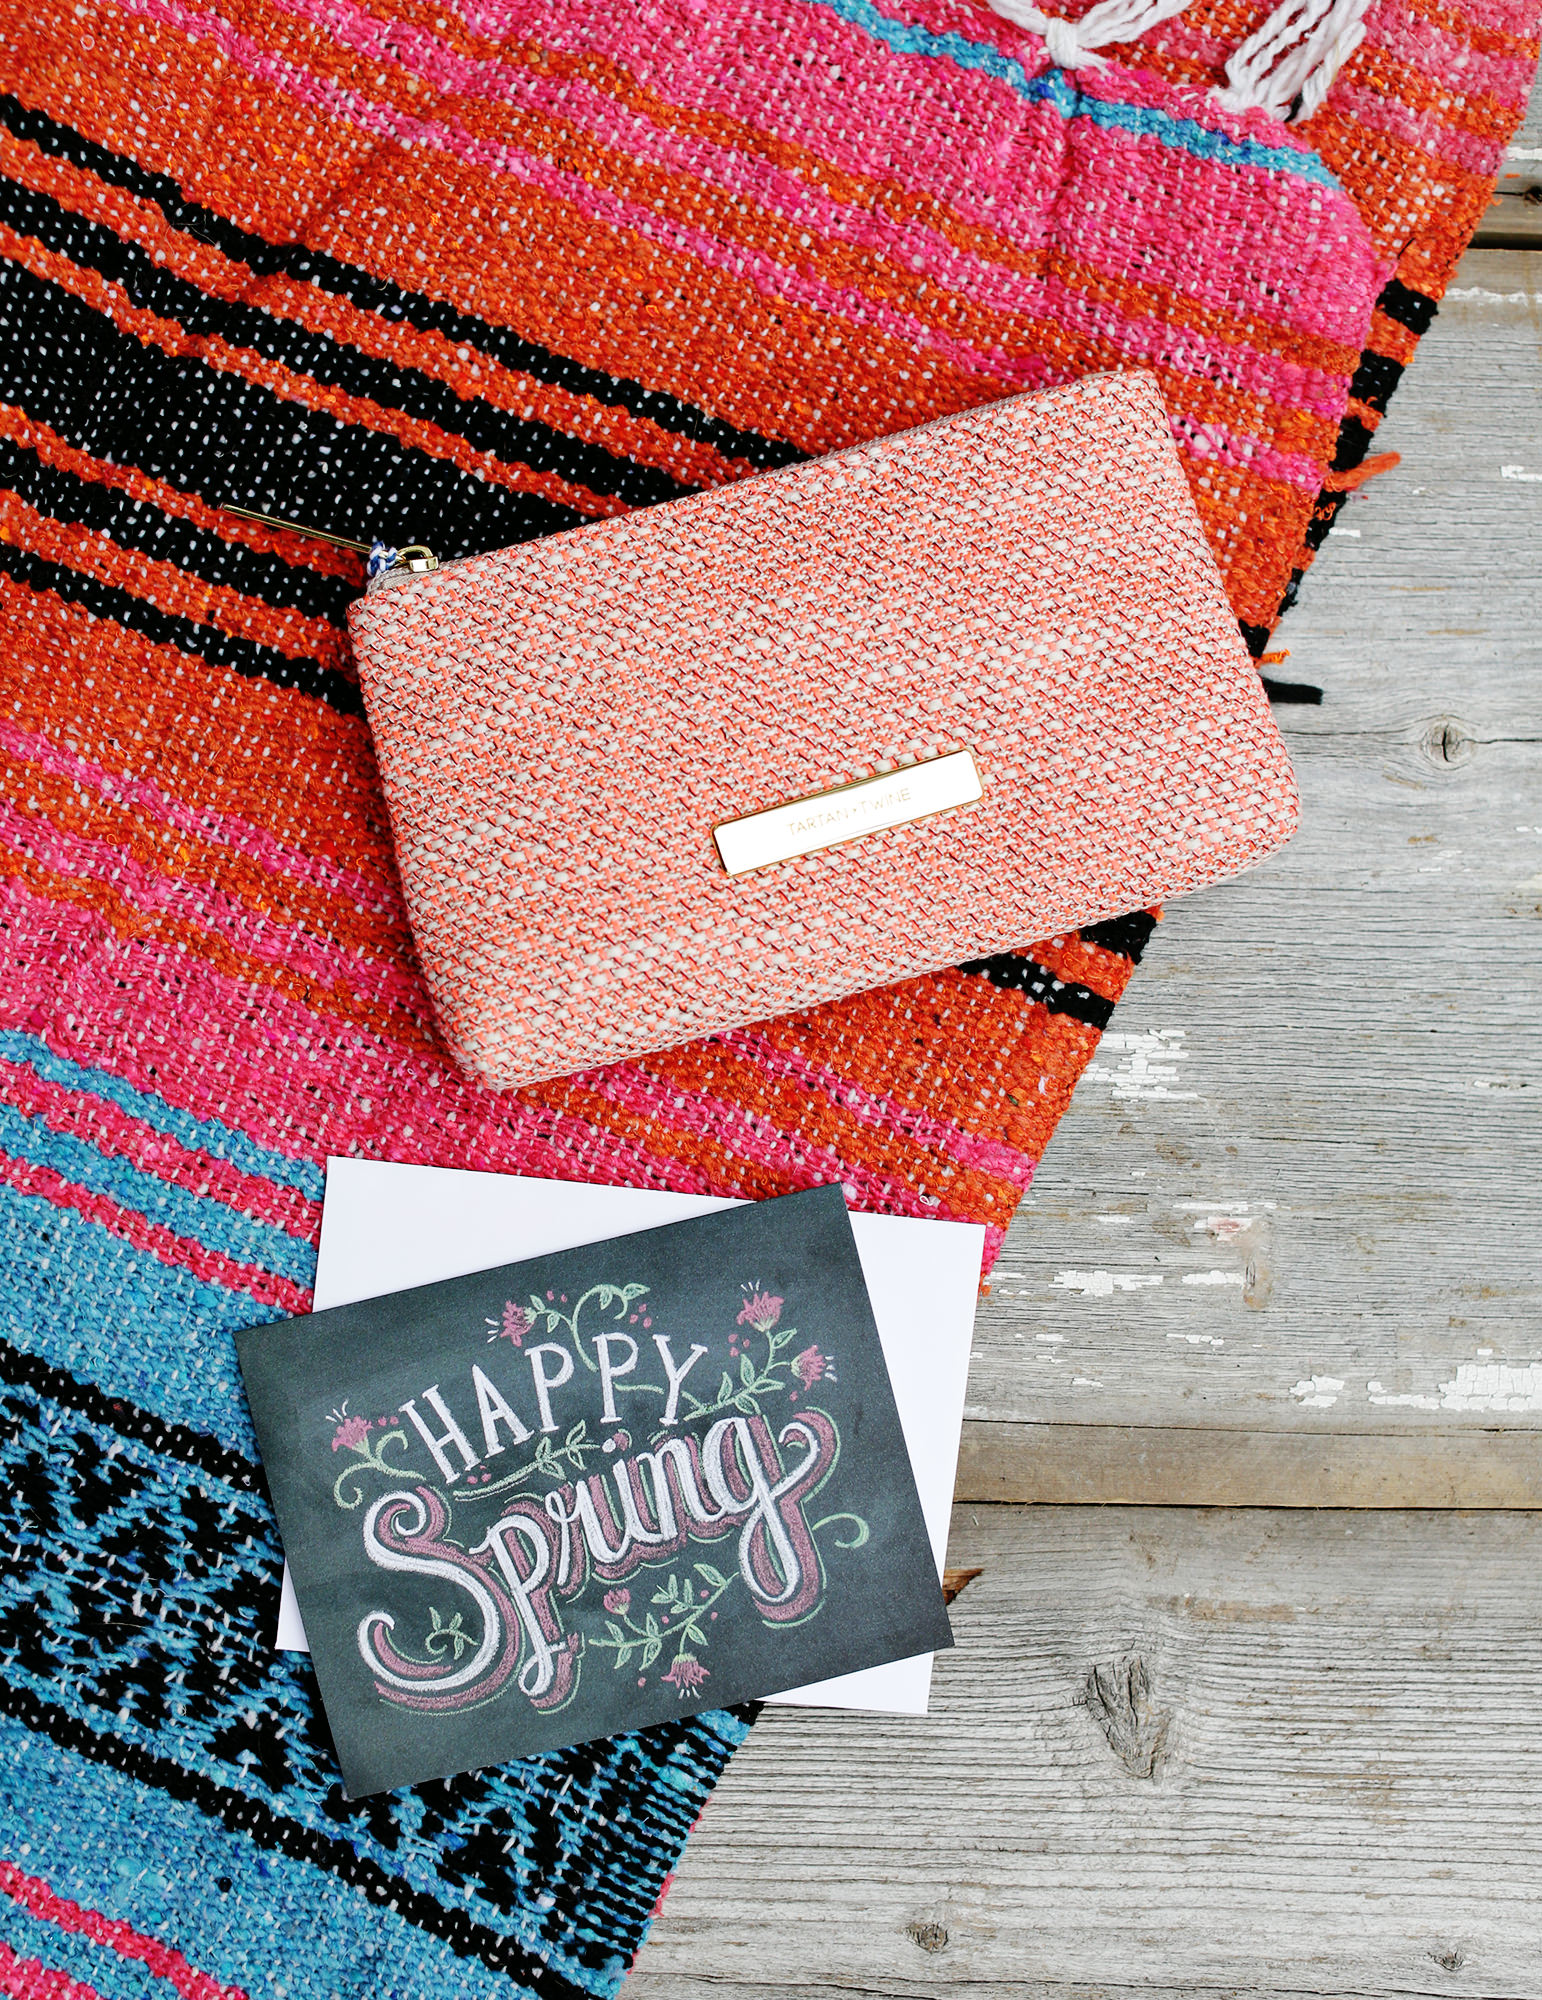 Say 'Happy Spring' by treating a friend to a bright makeup bag and fun pampering treats!